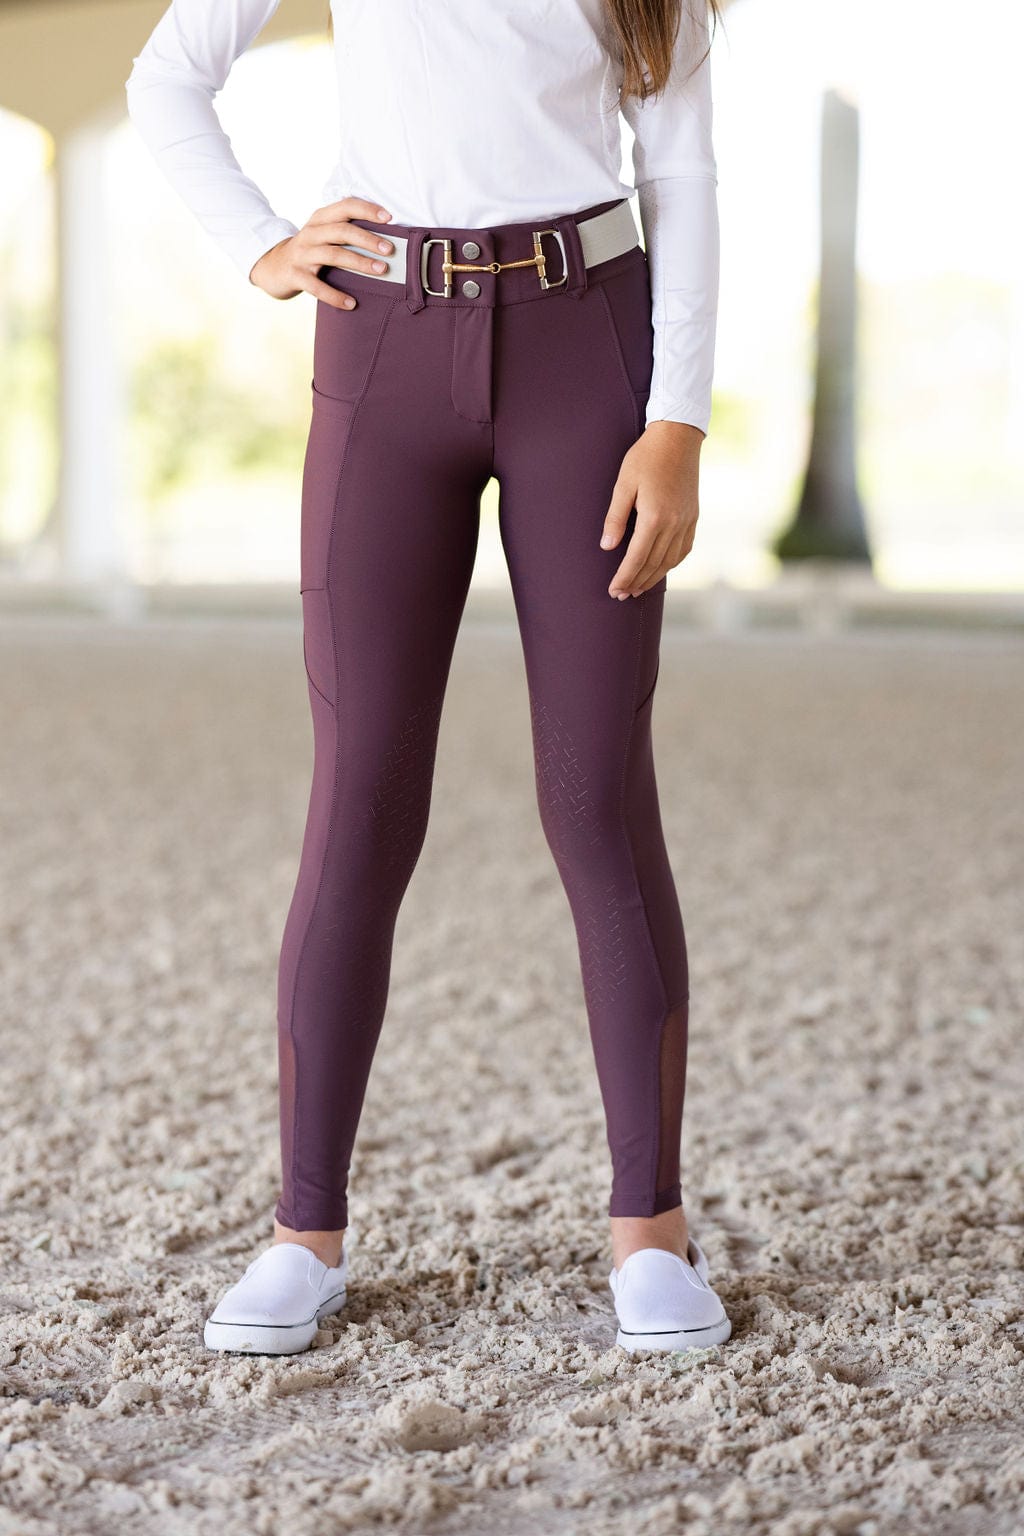 Plum Lux | Full Seat or Knee Patch Breech (zip-up)